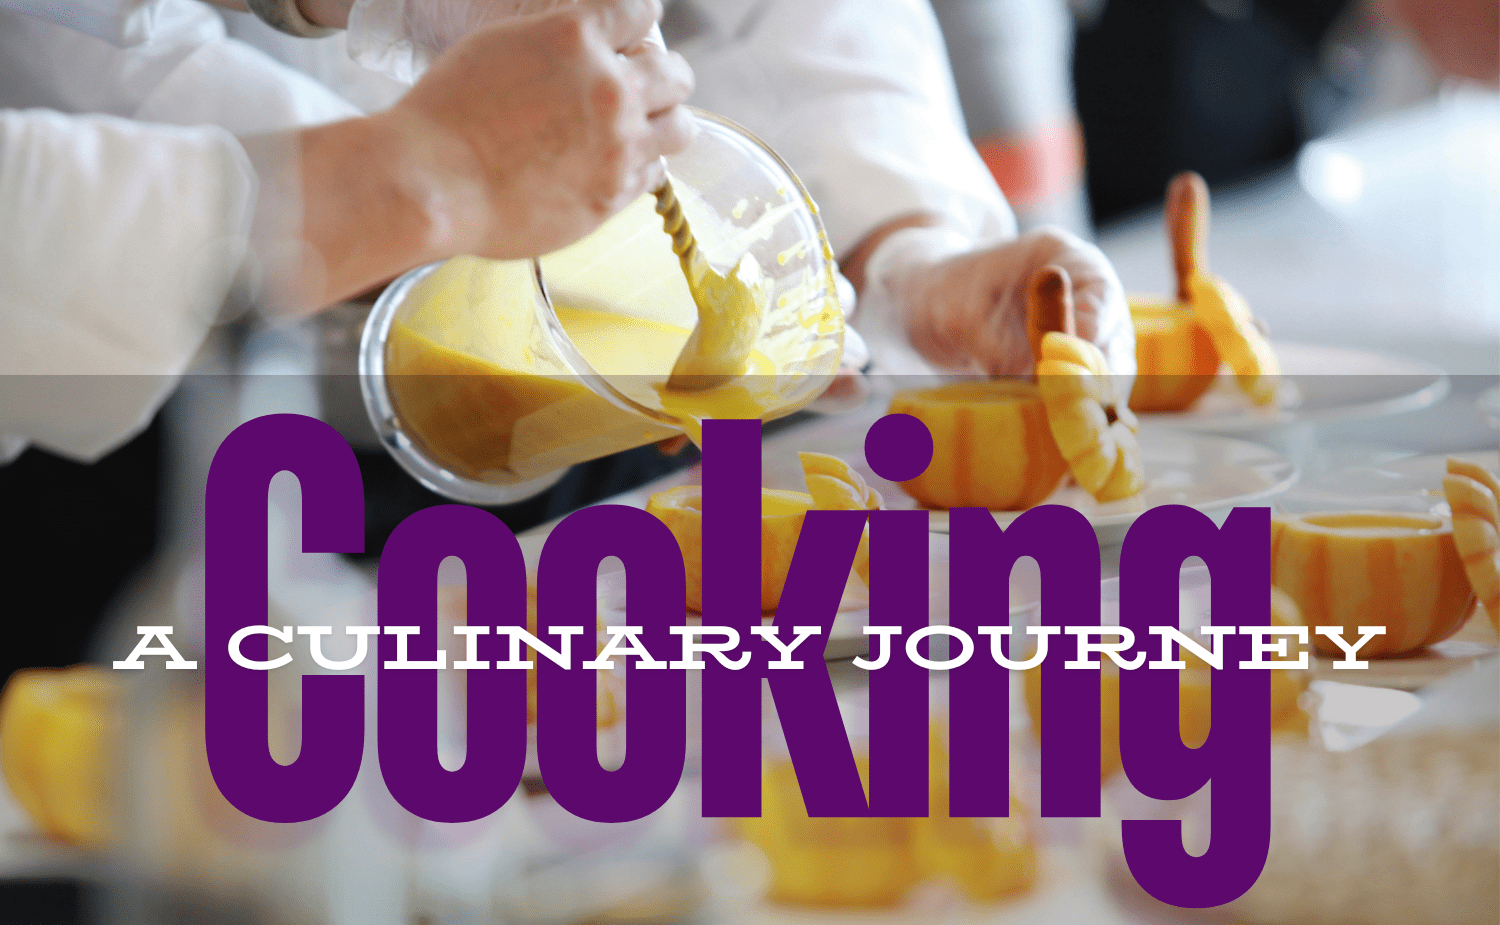 Cooking: A culinary Journey